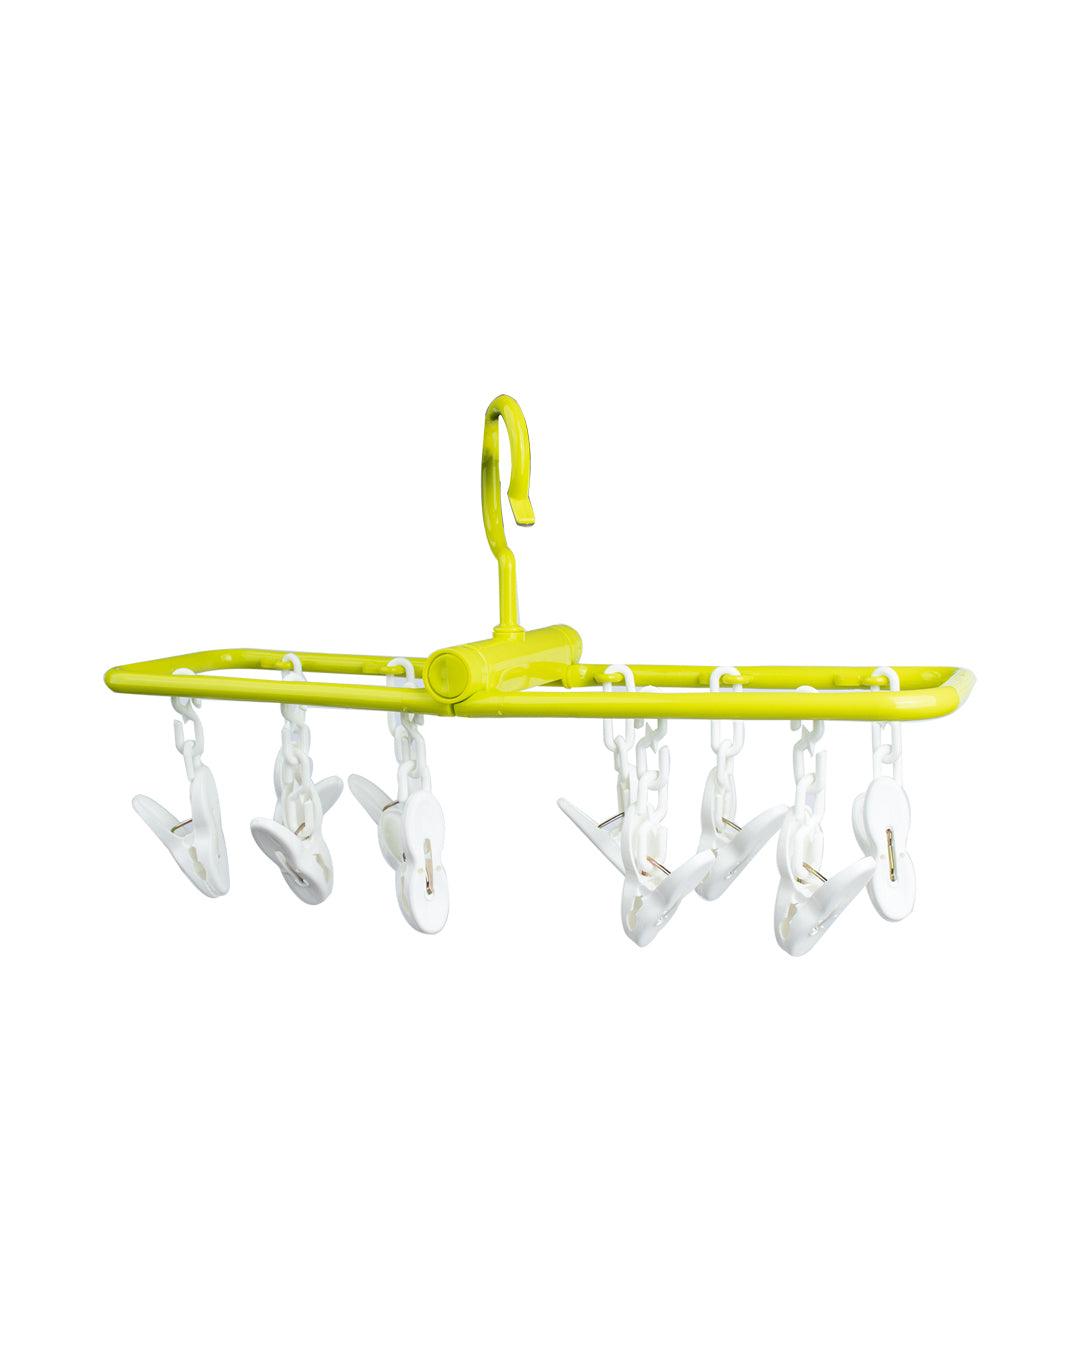 Cloth Hanger with 10 Pegs, Clips, Green, Plastic, - MARKET 99